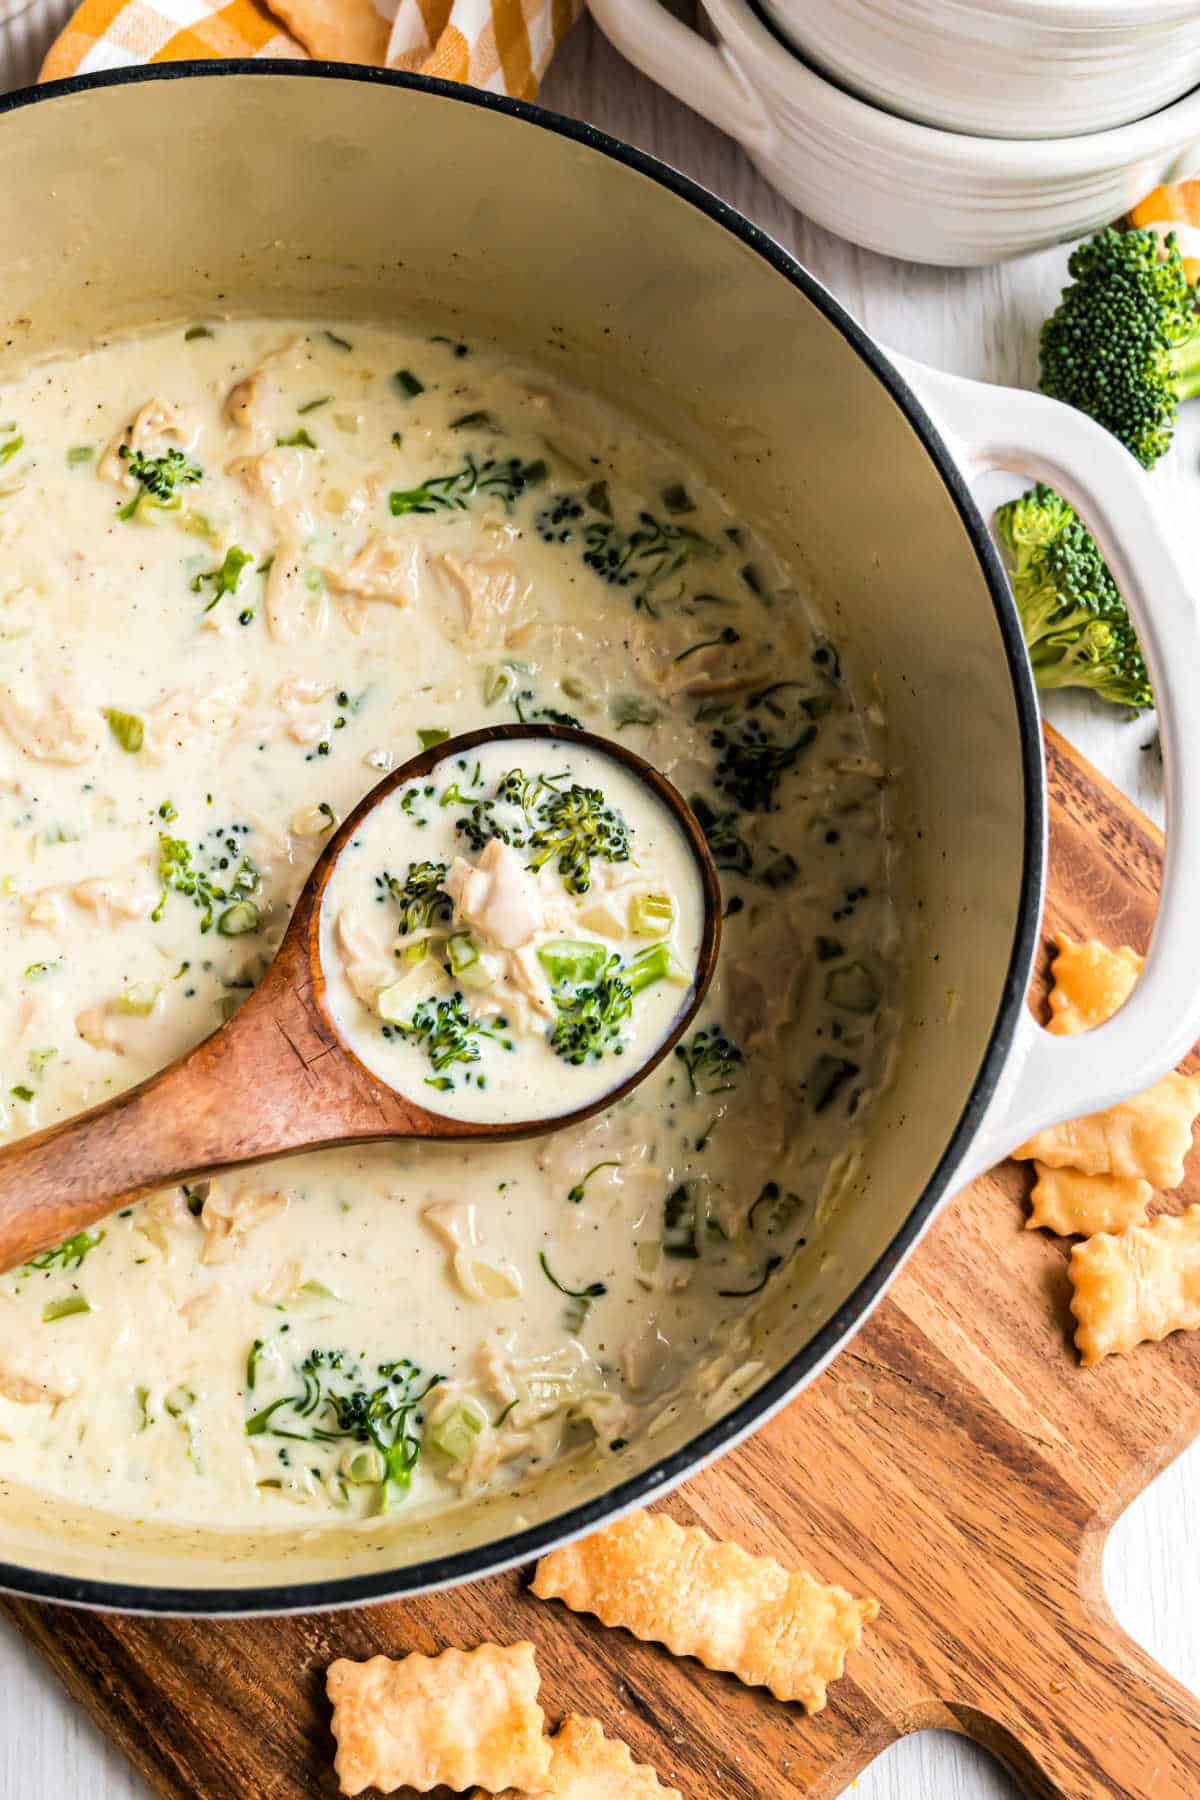 Soup pot and ladle with a creamy broccoli chicken soup.